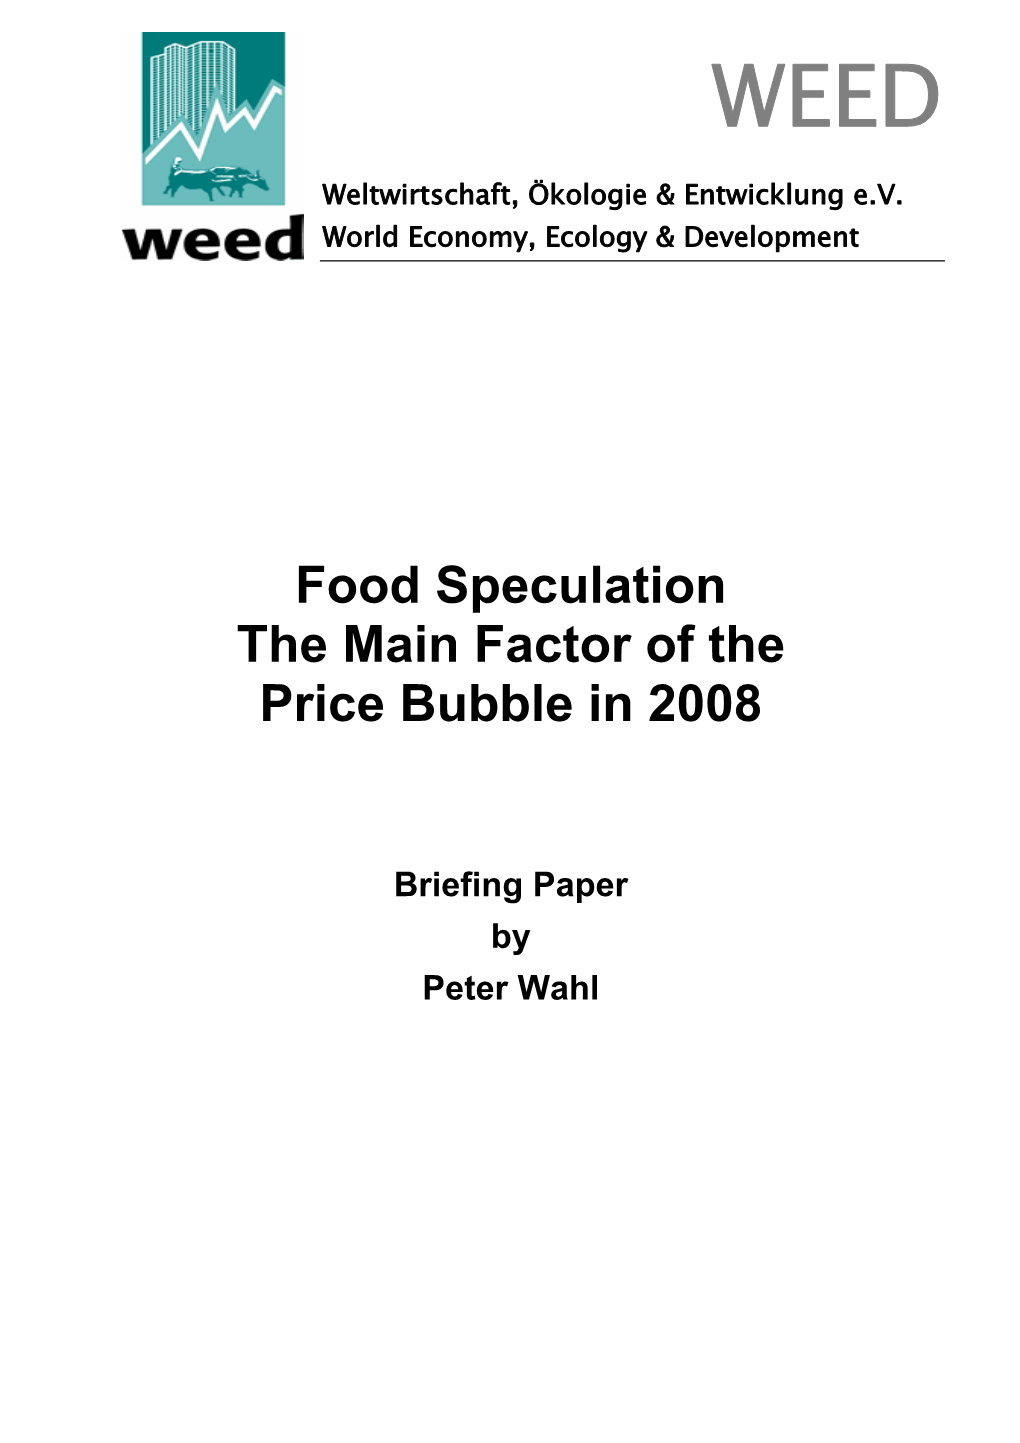 Food Speculation the Main Factor of the Price Bubble in 2008